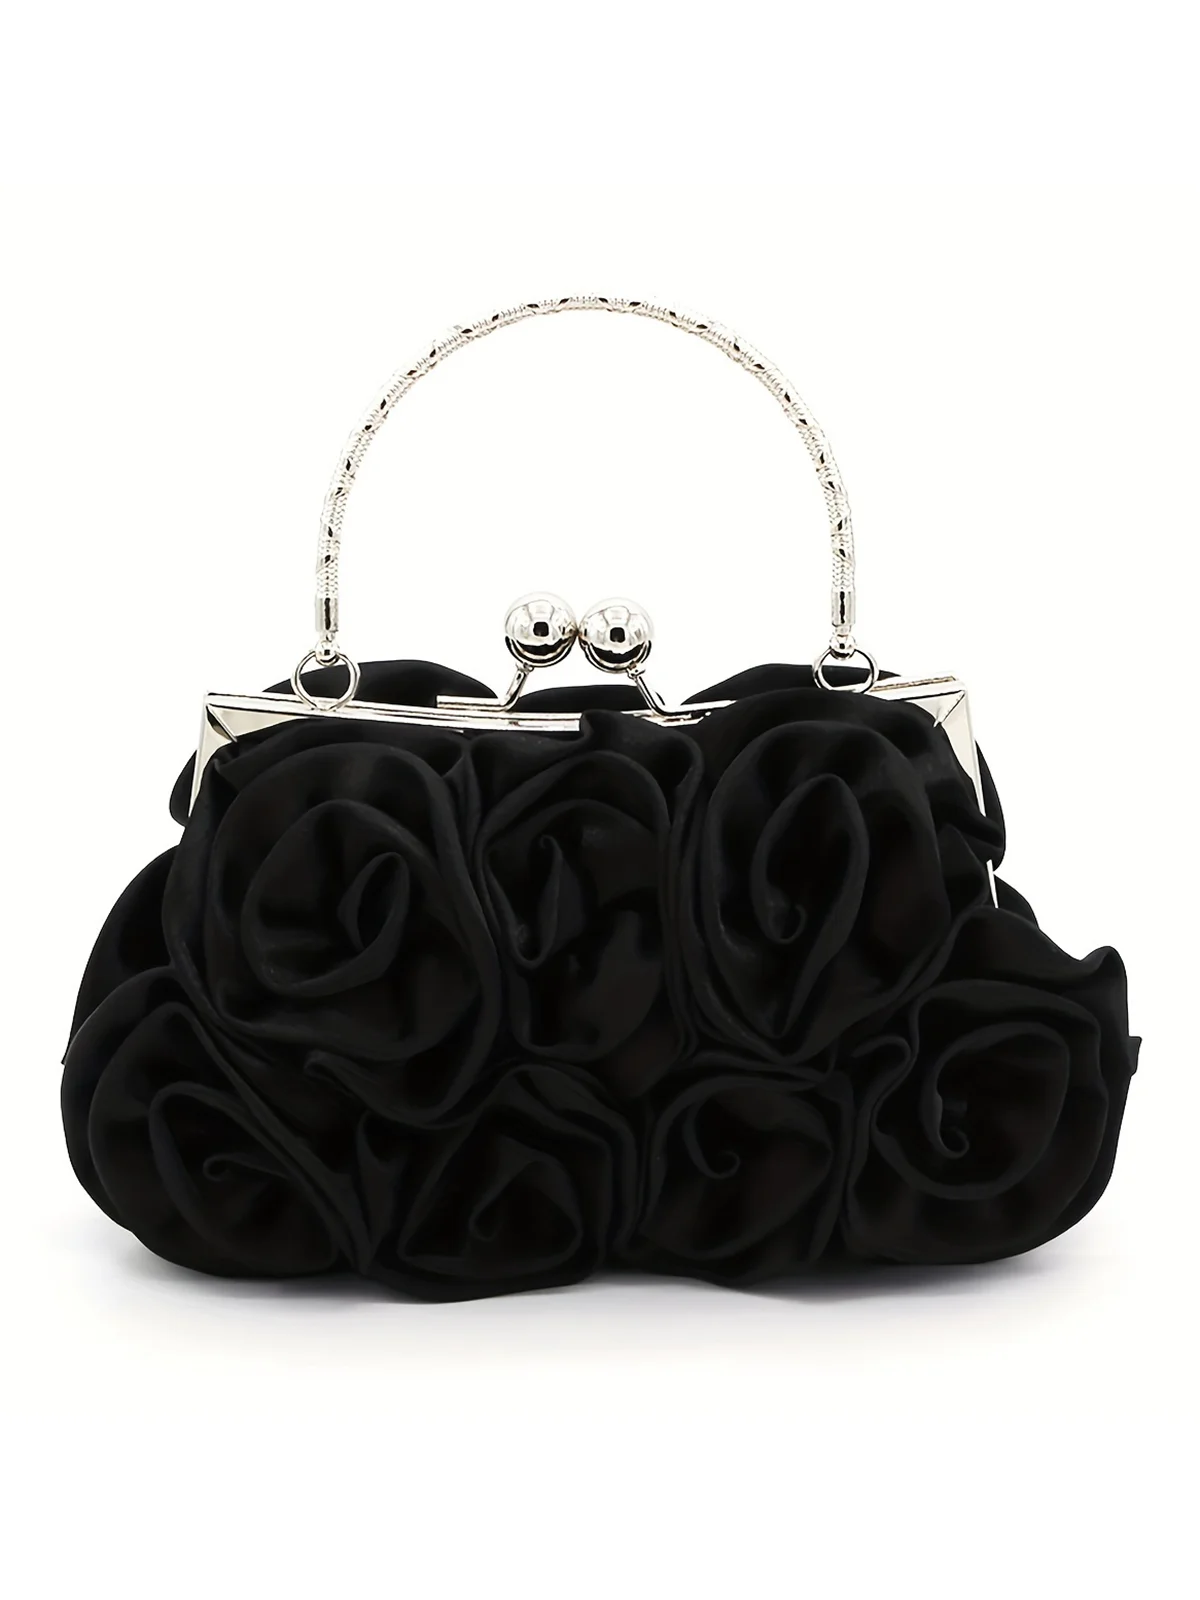 Elegent Flower Decorated Satin Metal Handle Evening Clutch with Chain Strap